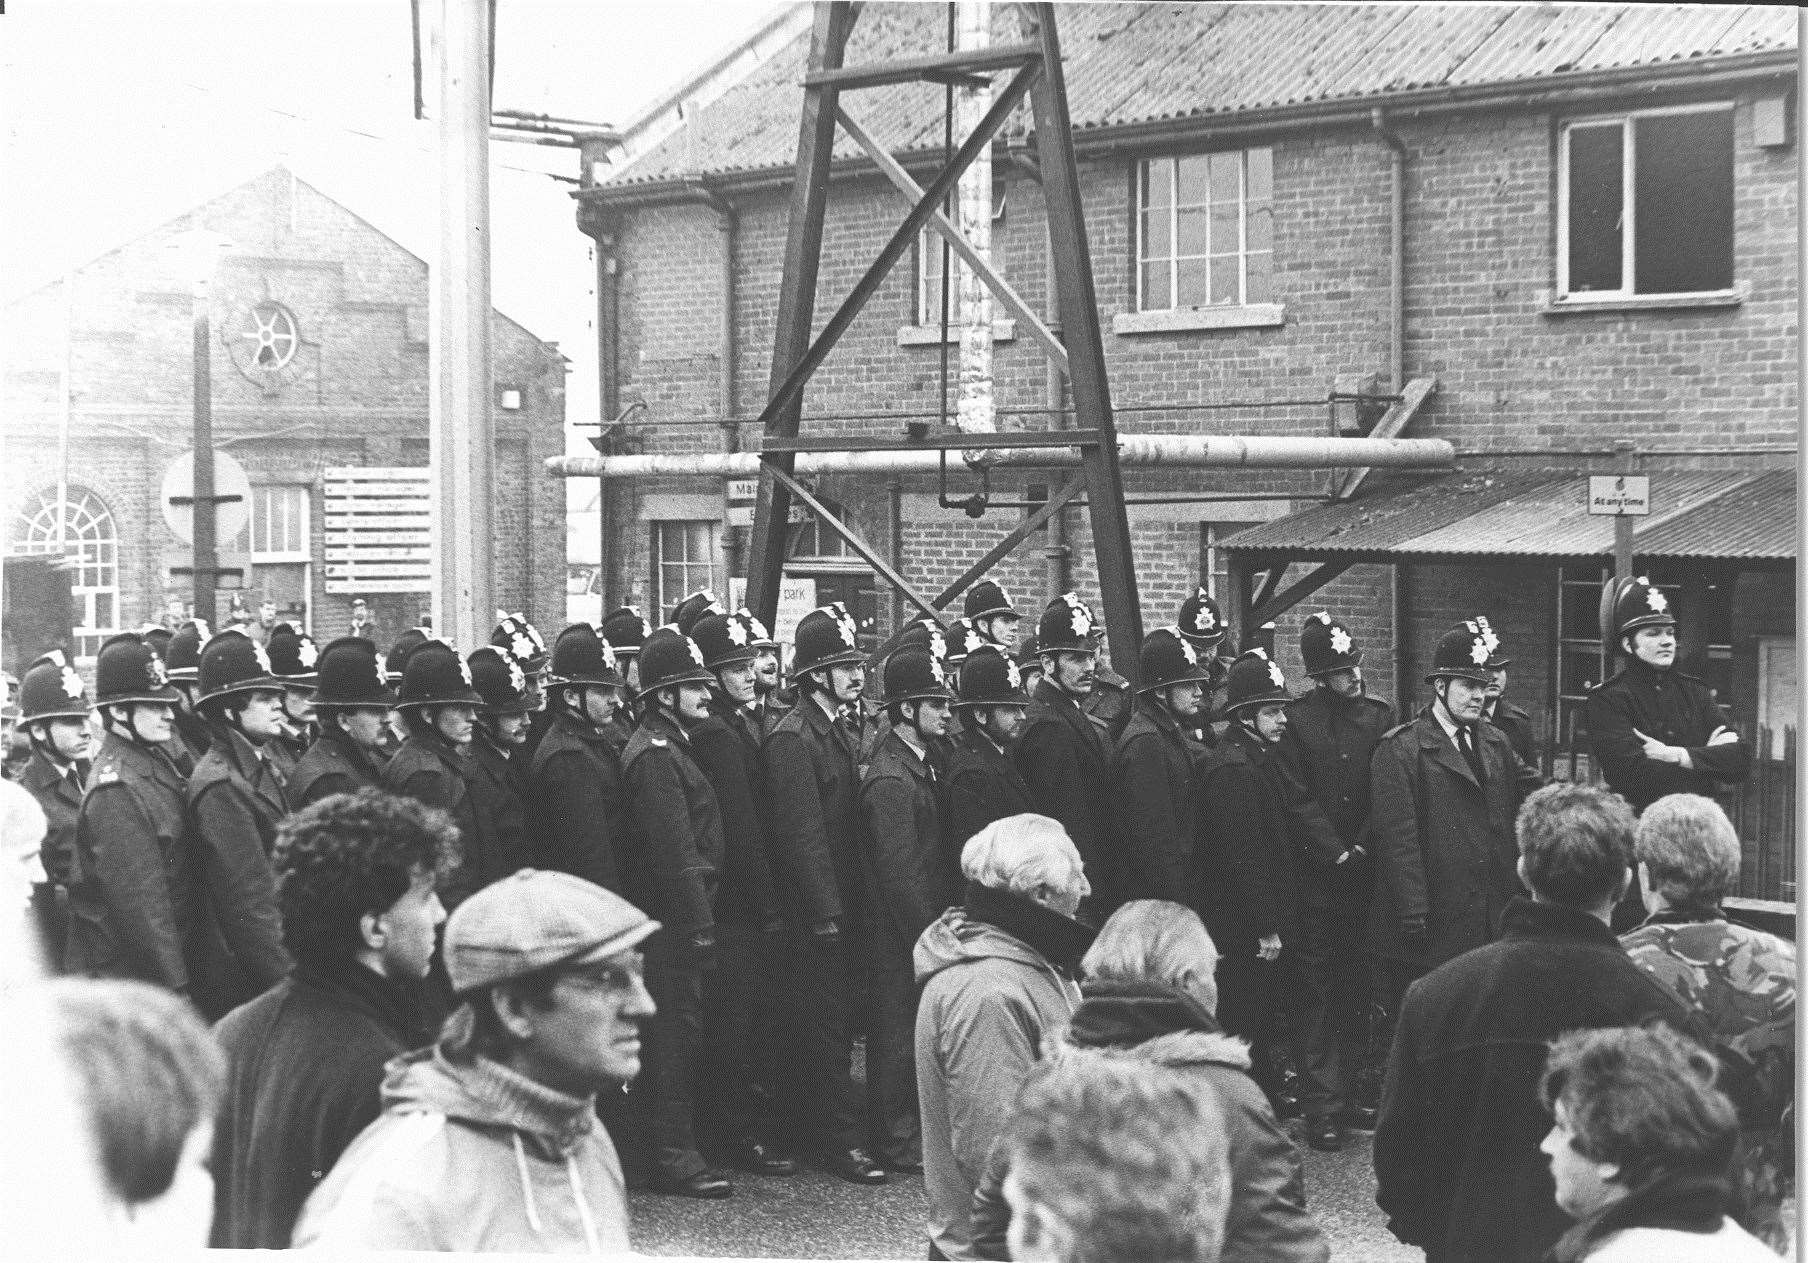 Pickets and police at Snowdown Colliery during the miners' strike in 1984